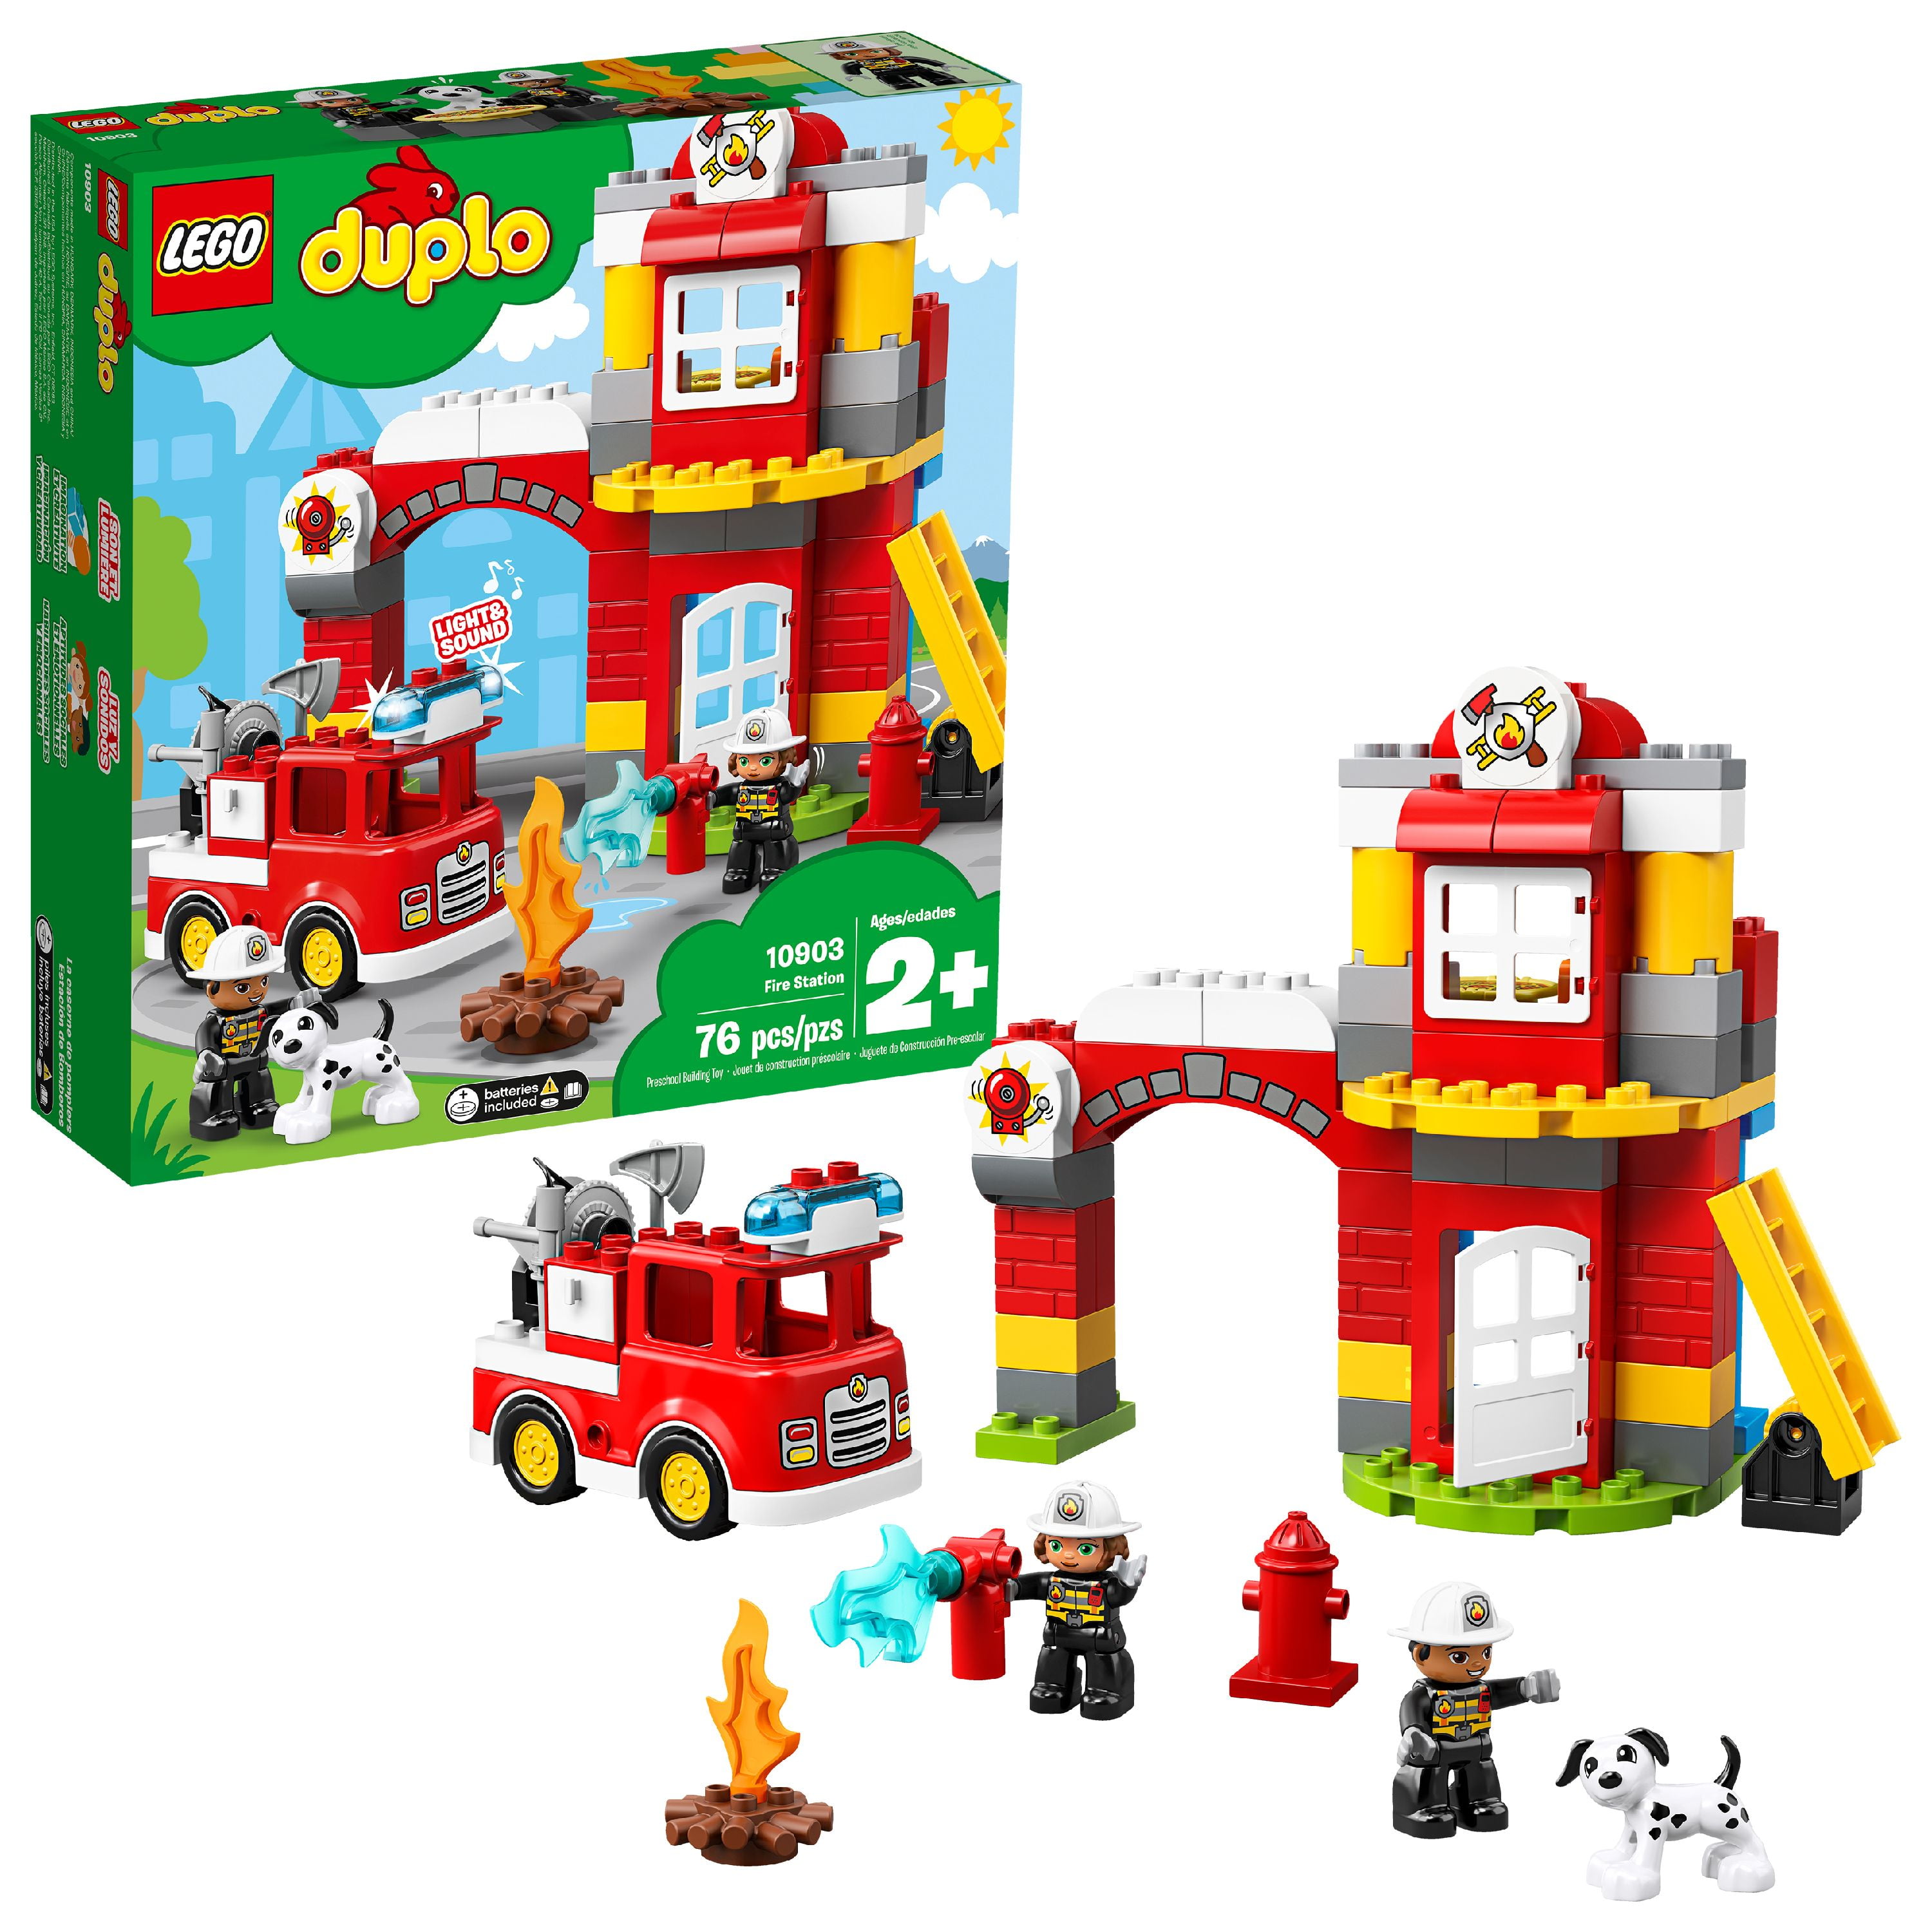 LEGO 3 NEW RED FIREMEN FIREFIGHTER MINIFIGURES MEN CITY PEOPLE WITH TOOLS 